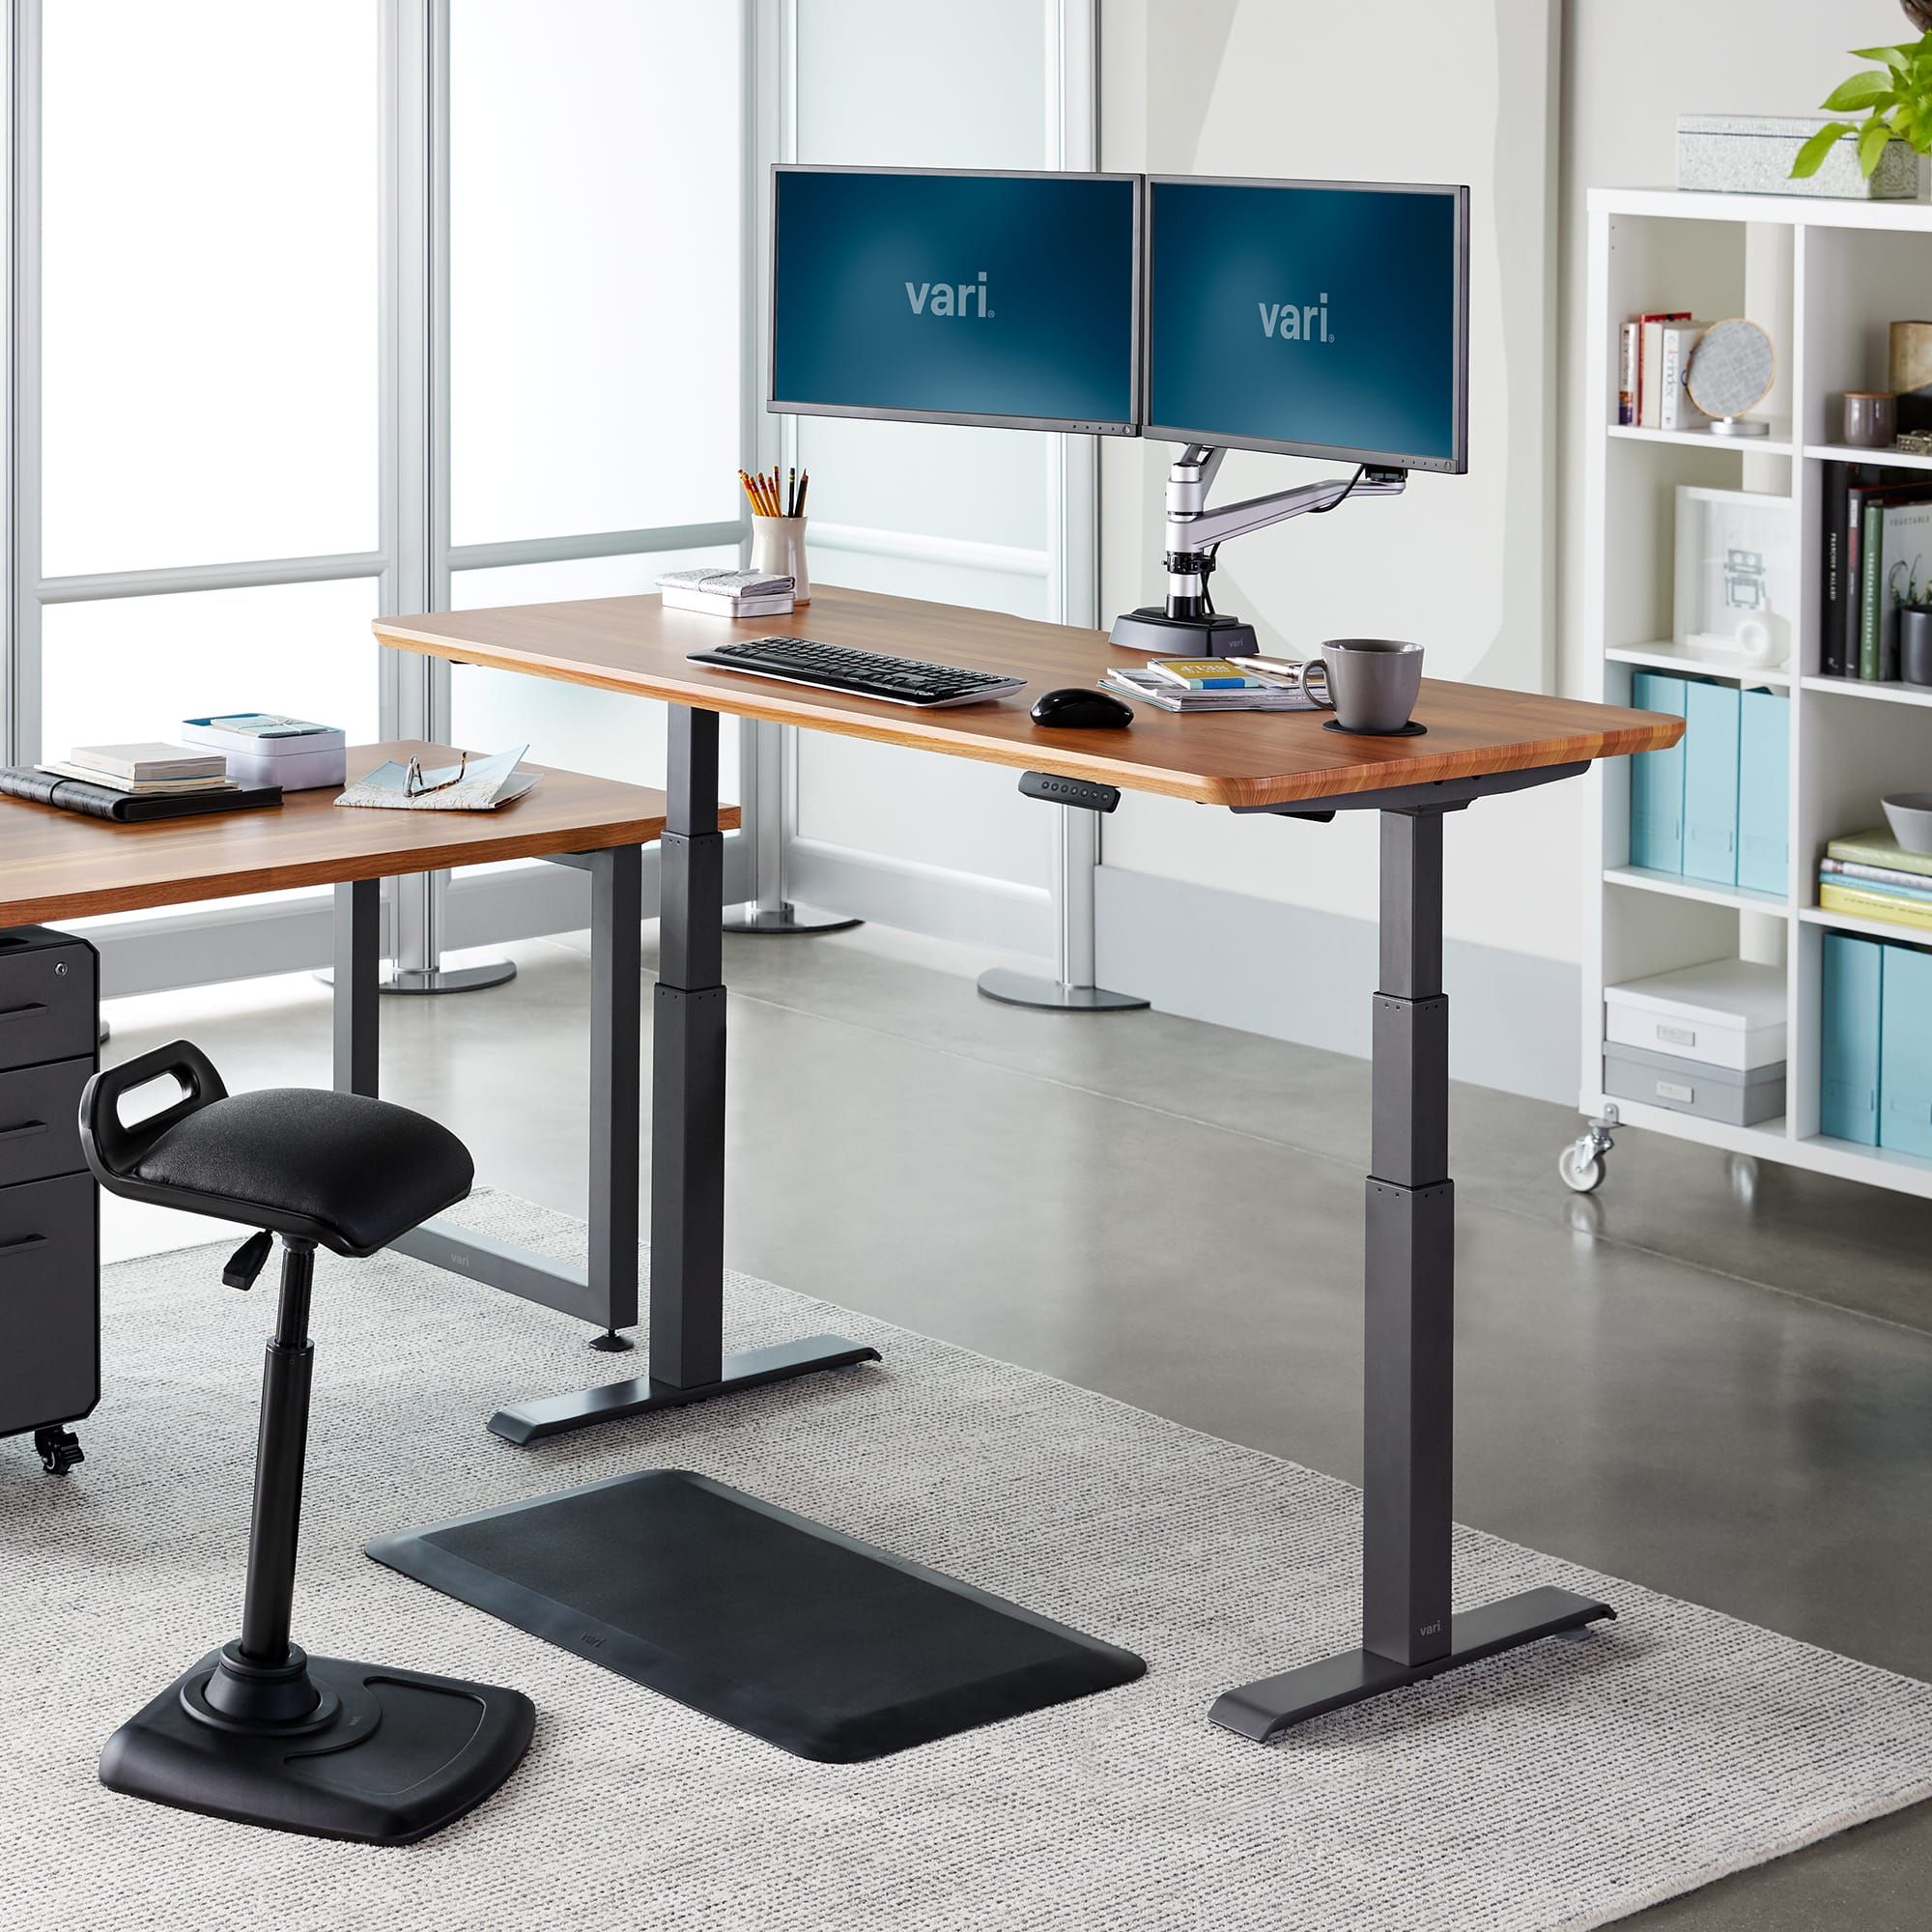 How to choose and buy on a bulletin board in Israel: Adjustable standing desks for a healthier workspace.